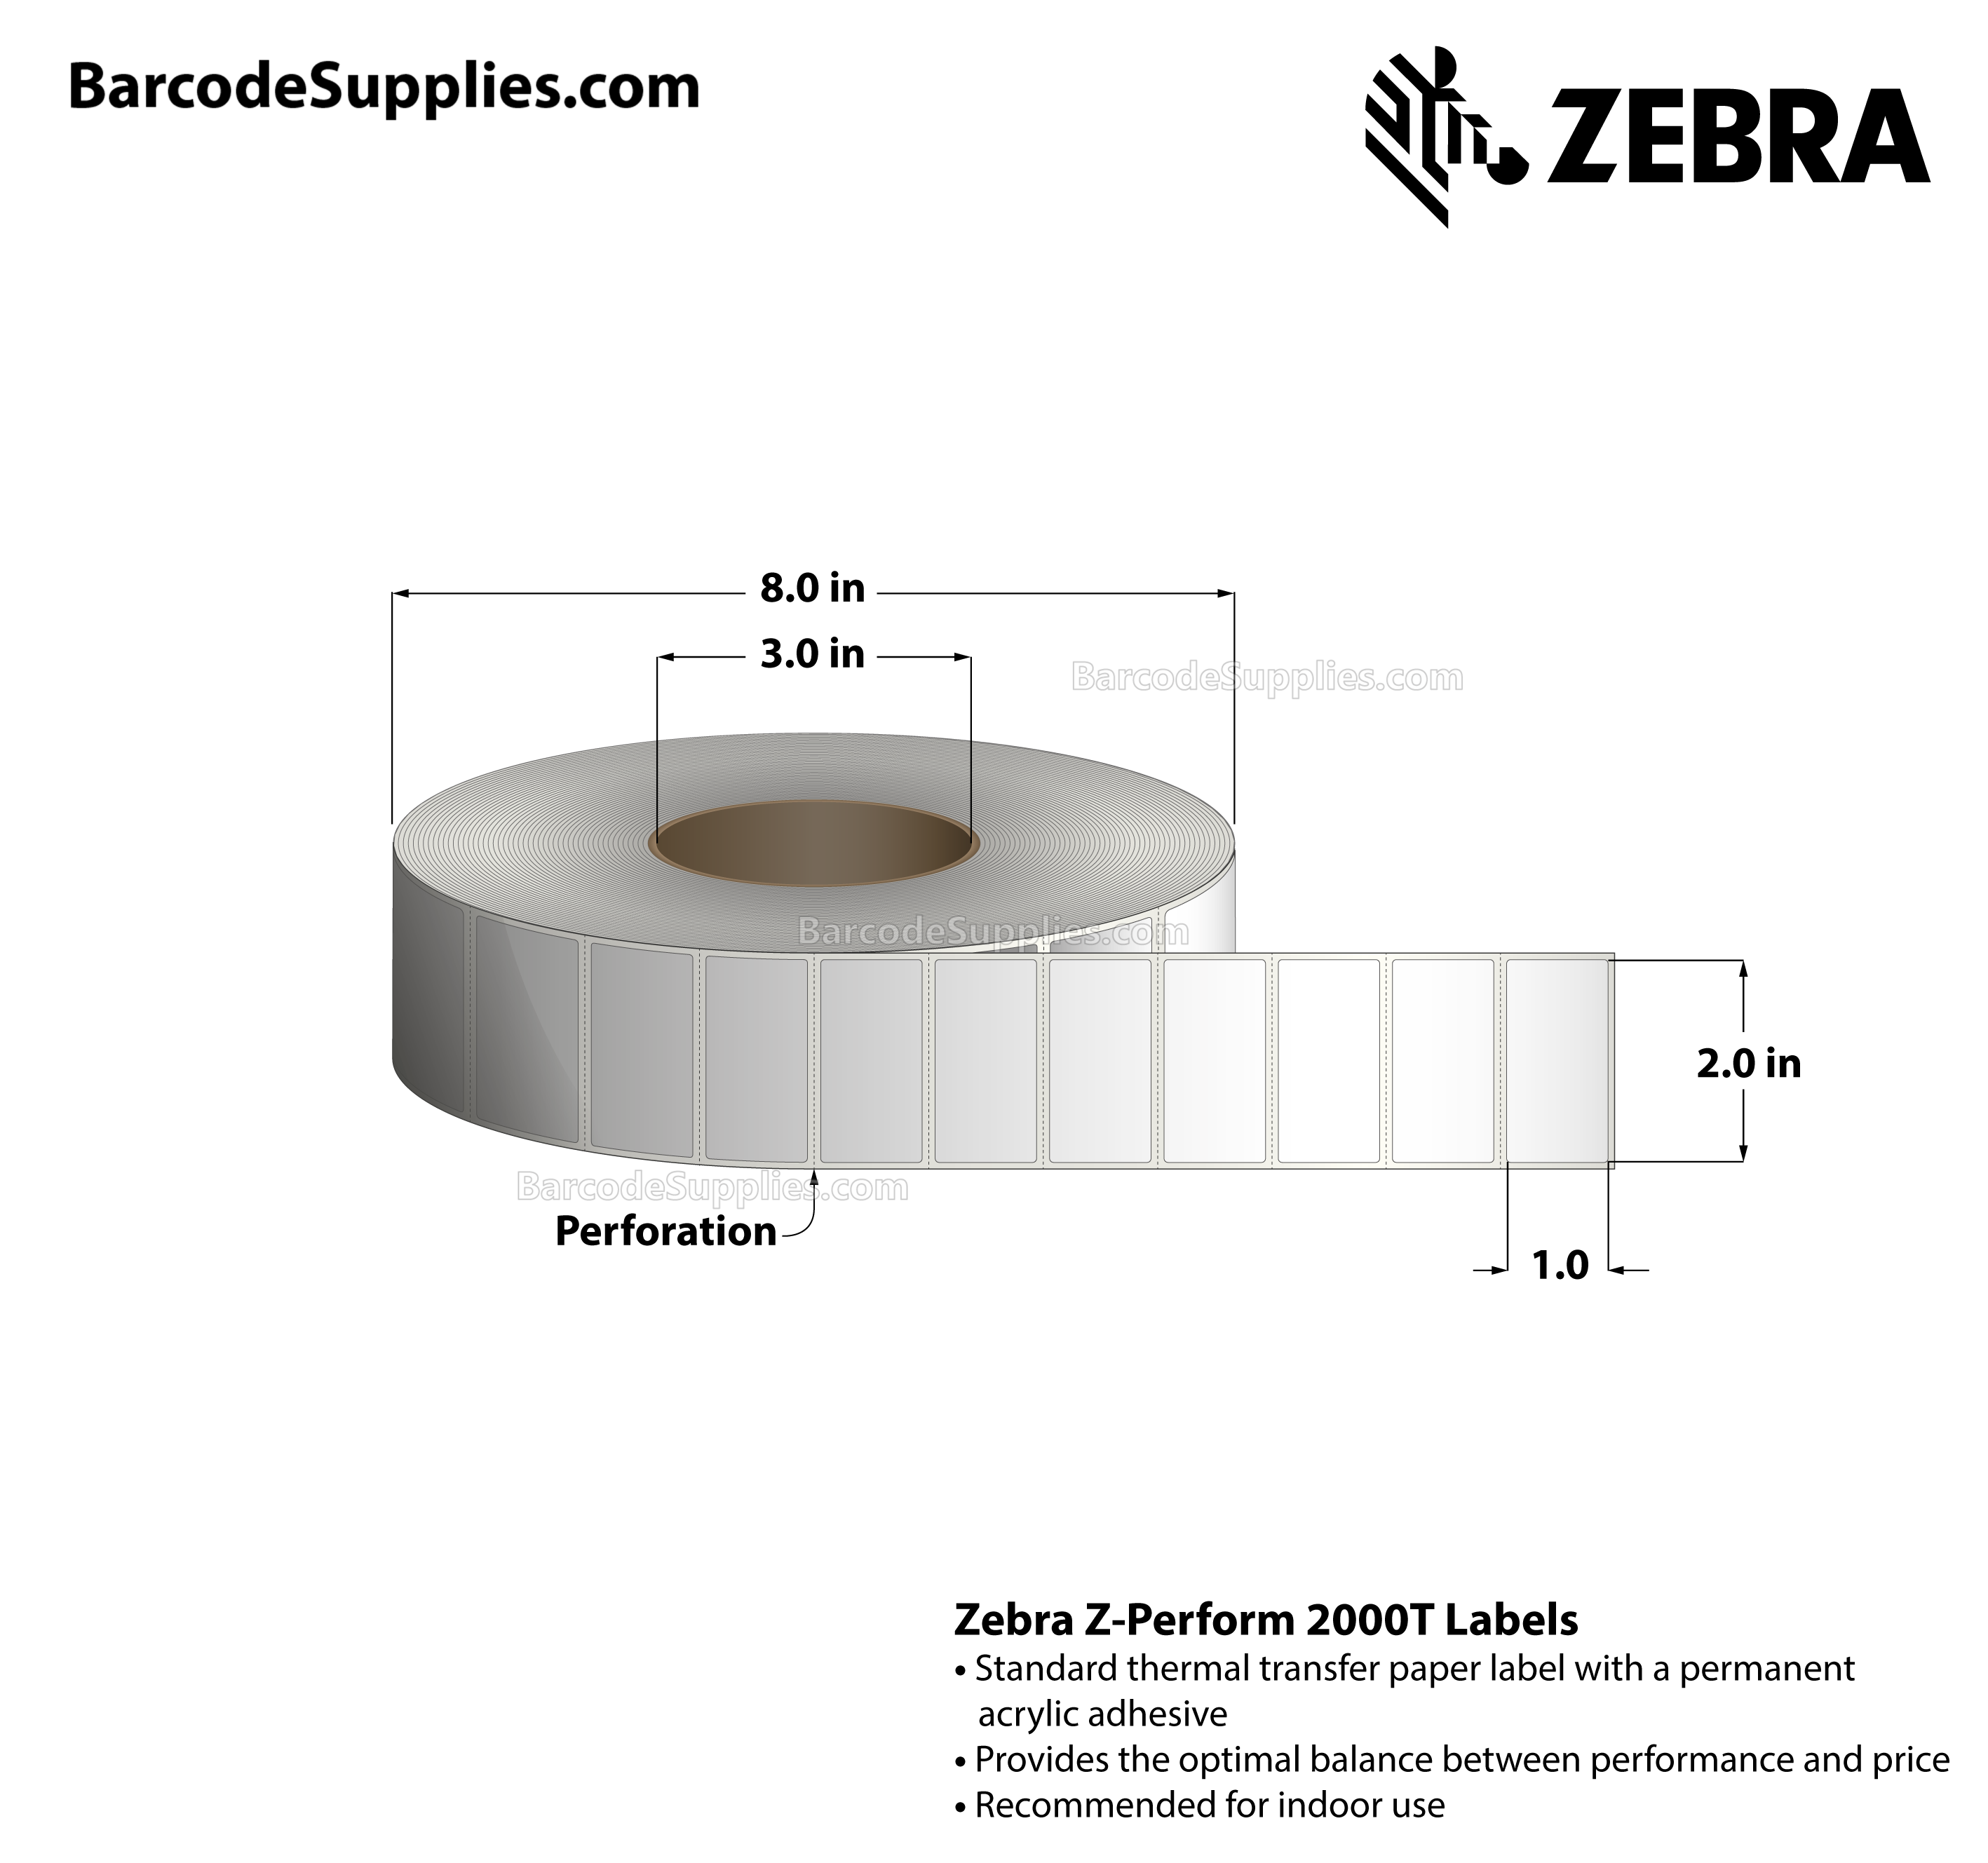 2 x 1 Thermal Transfer White Z-Perform 2000T Labels With Permanent Adhesive - Perforated - 5500 Labels Per Roll - Carton Of 10 Rolls - 55000 Labels Total - MPN: 10000288